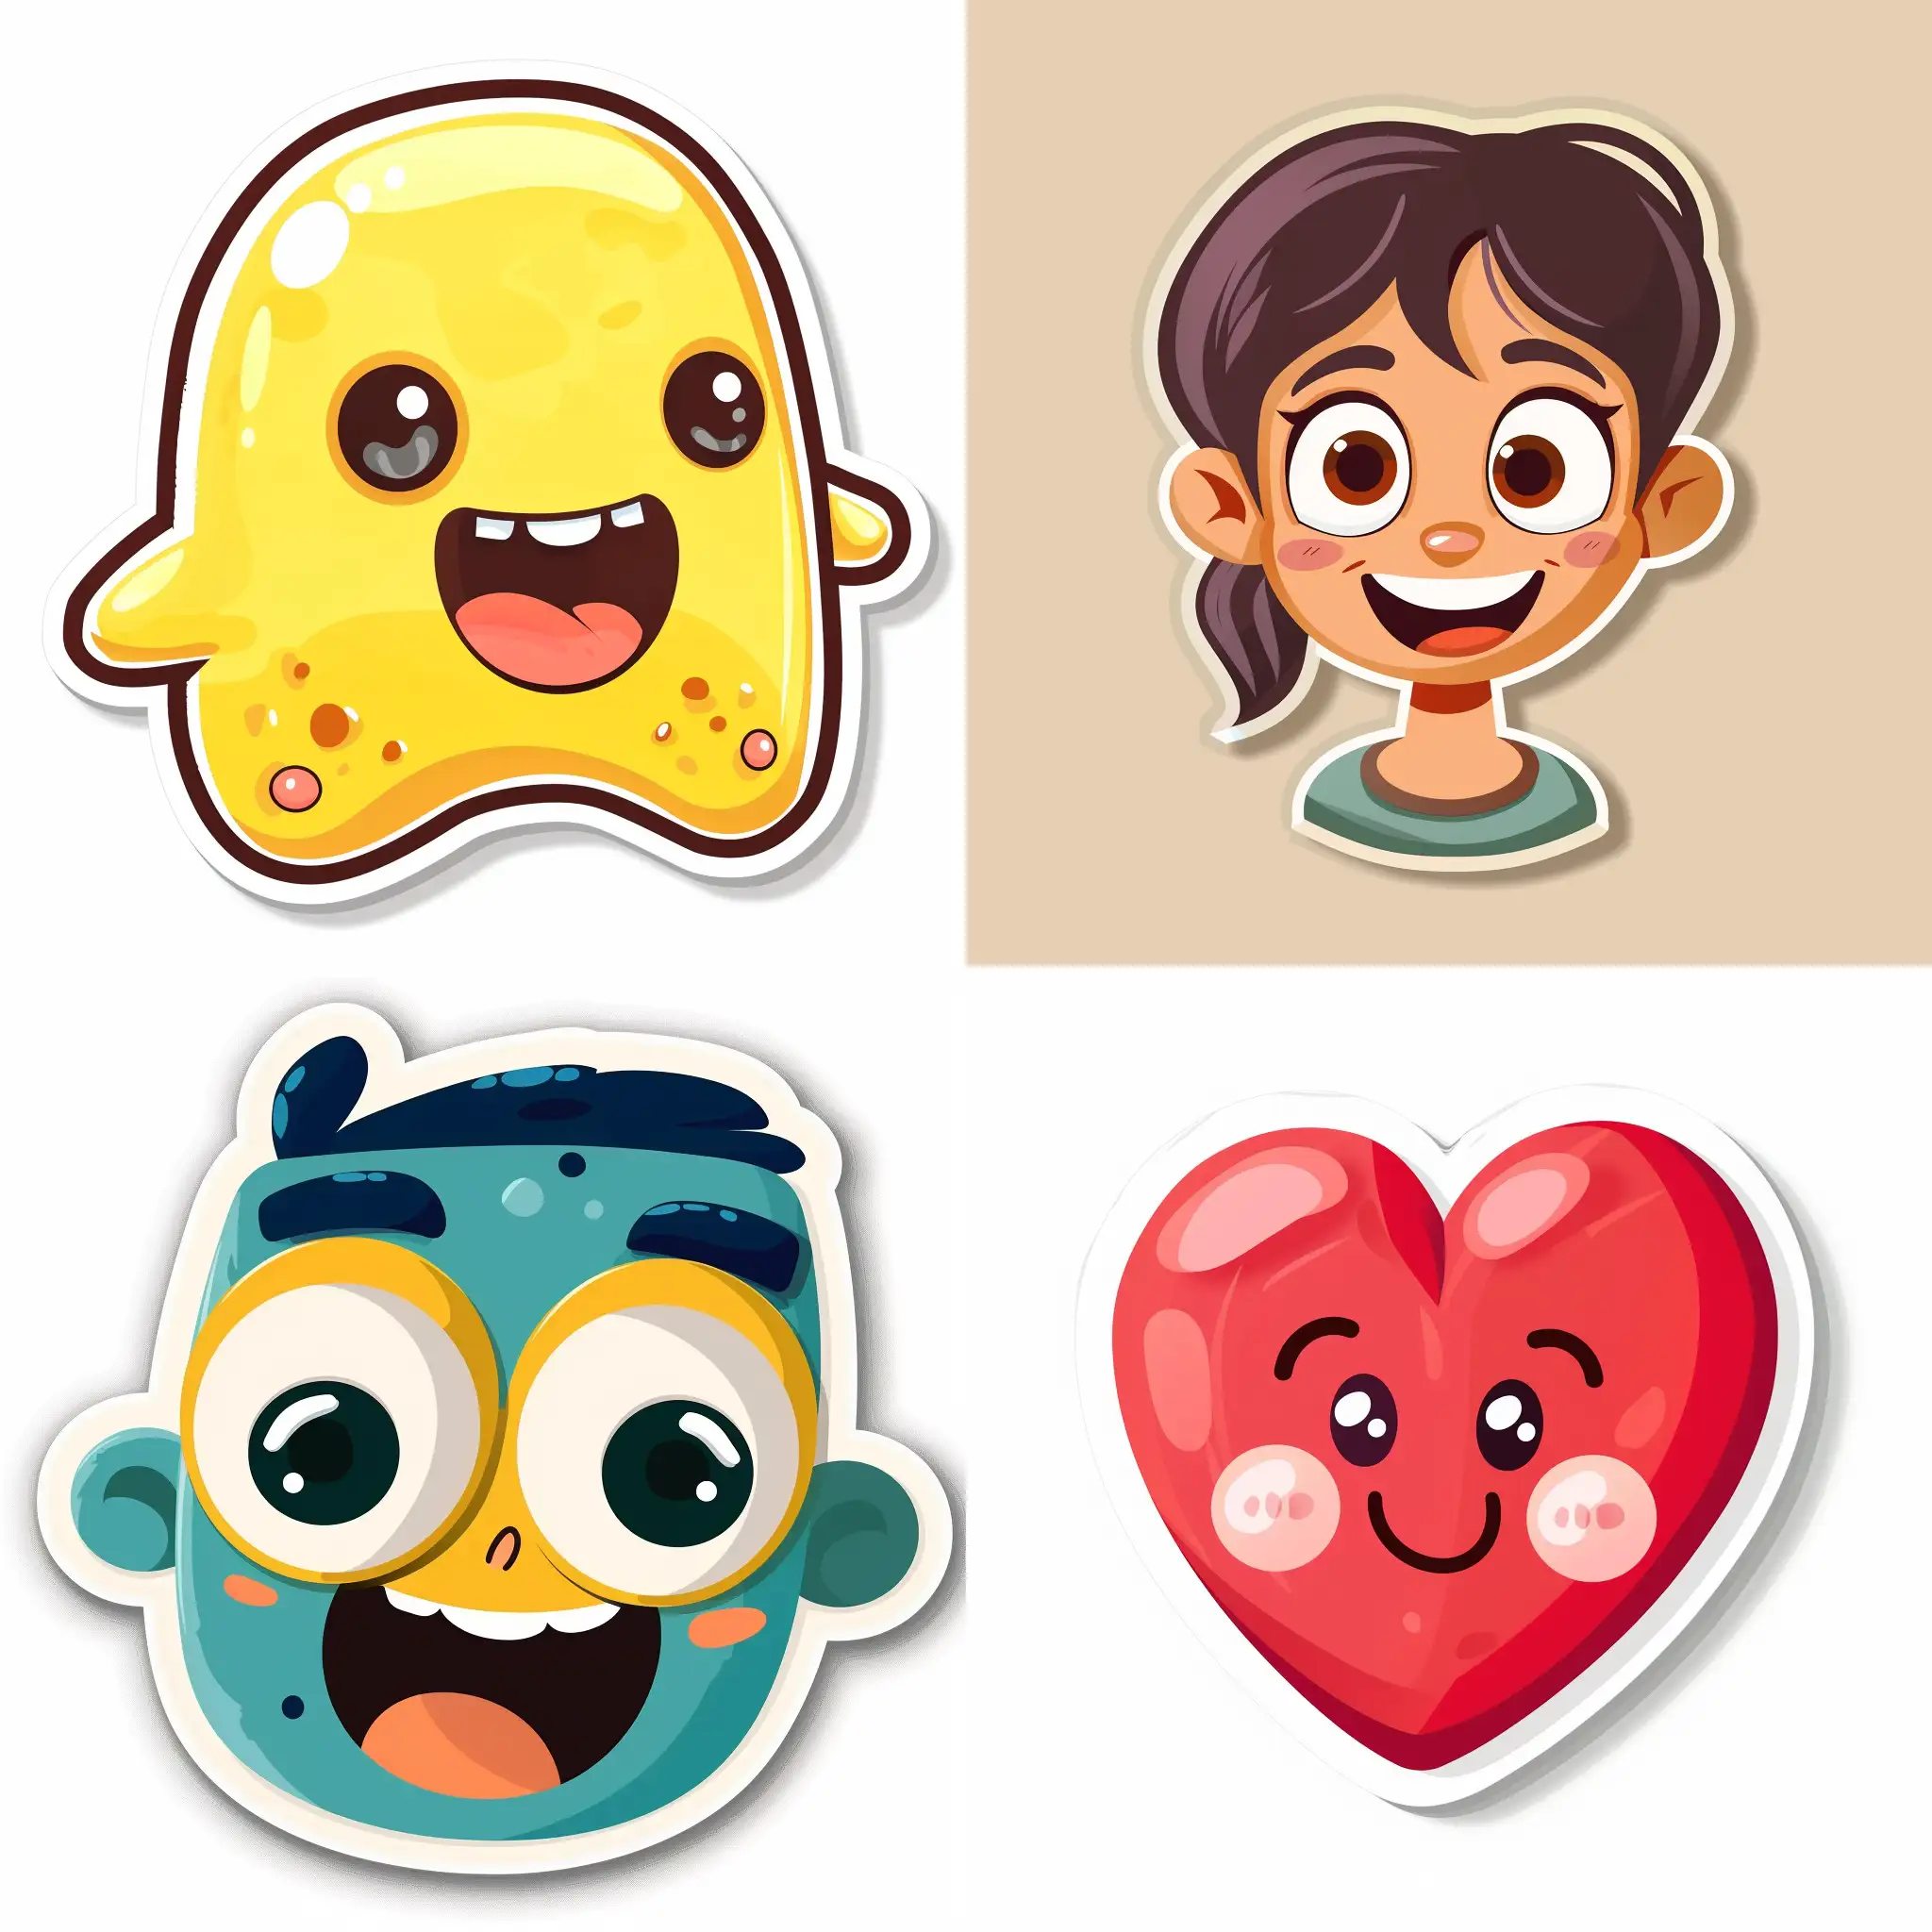 Colorful-Flat-Style-Cartoon-Stickers-for-Kids